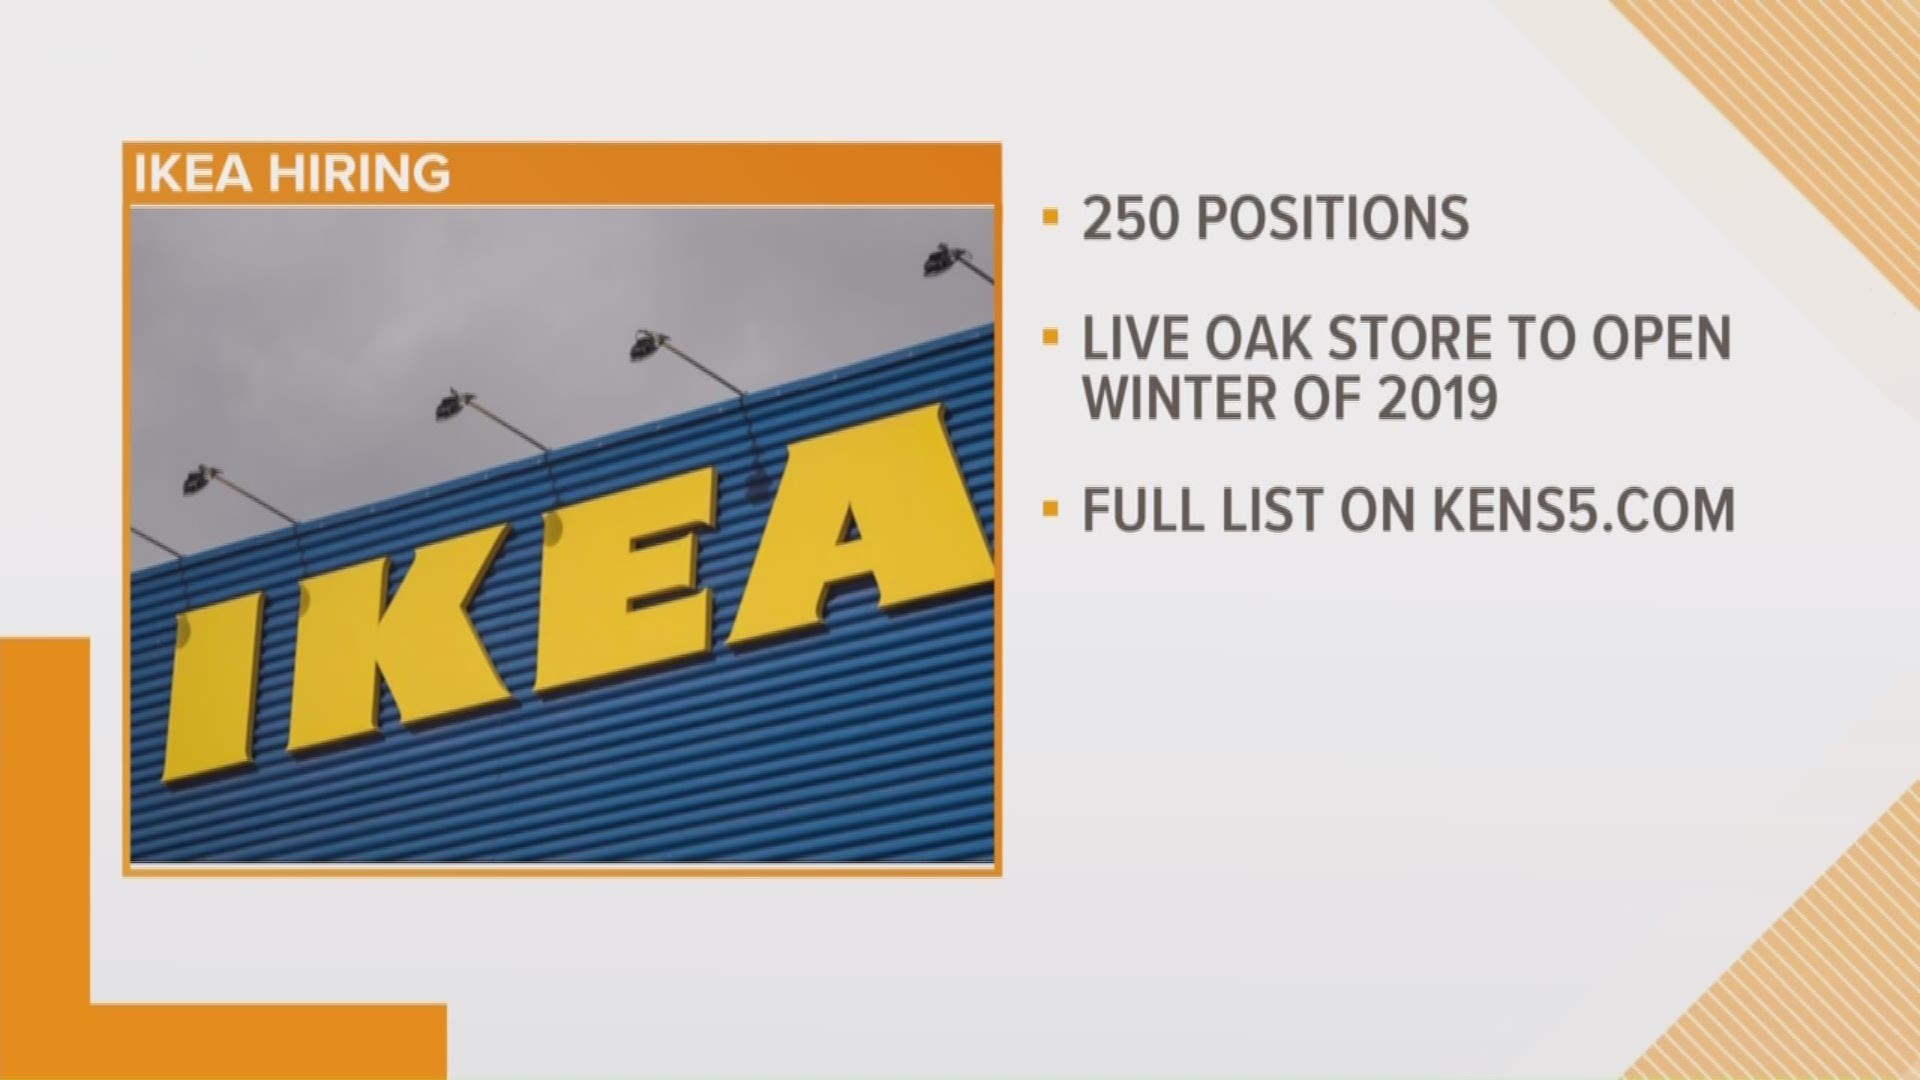 The furniture retailer IKEA is looking to fill 250 positions for the first San Antonio-area location opening in winter 2019.